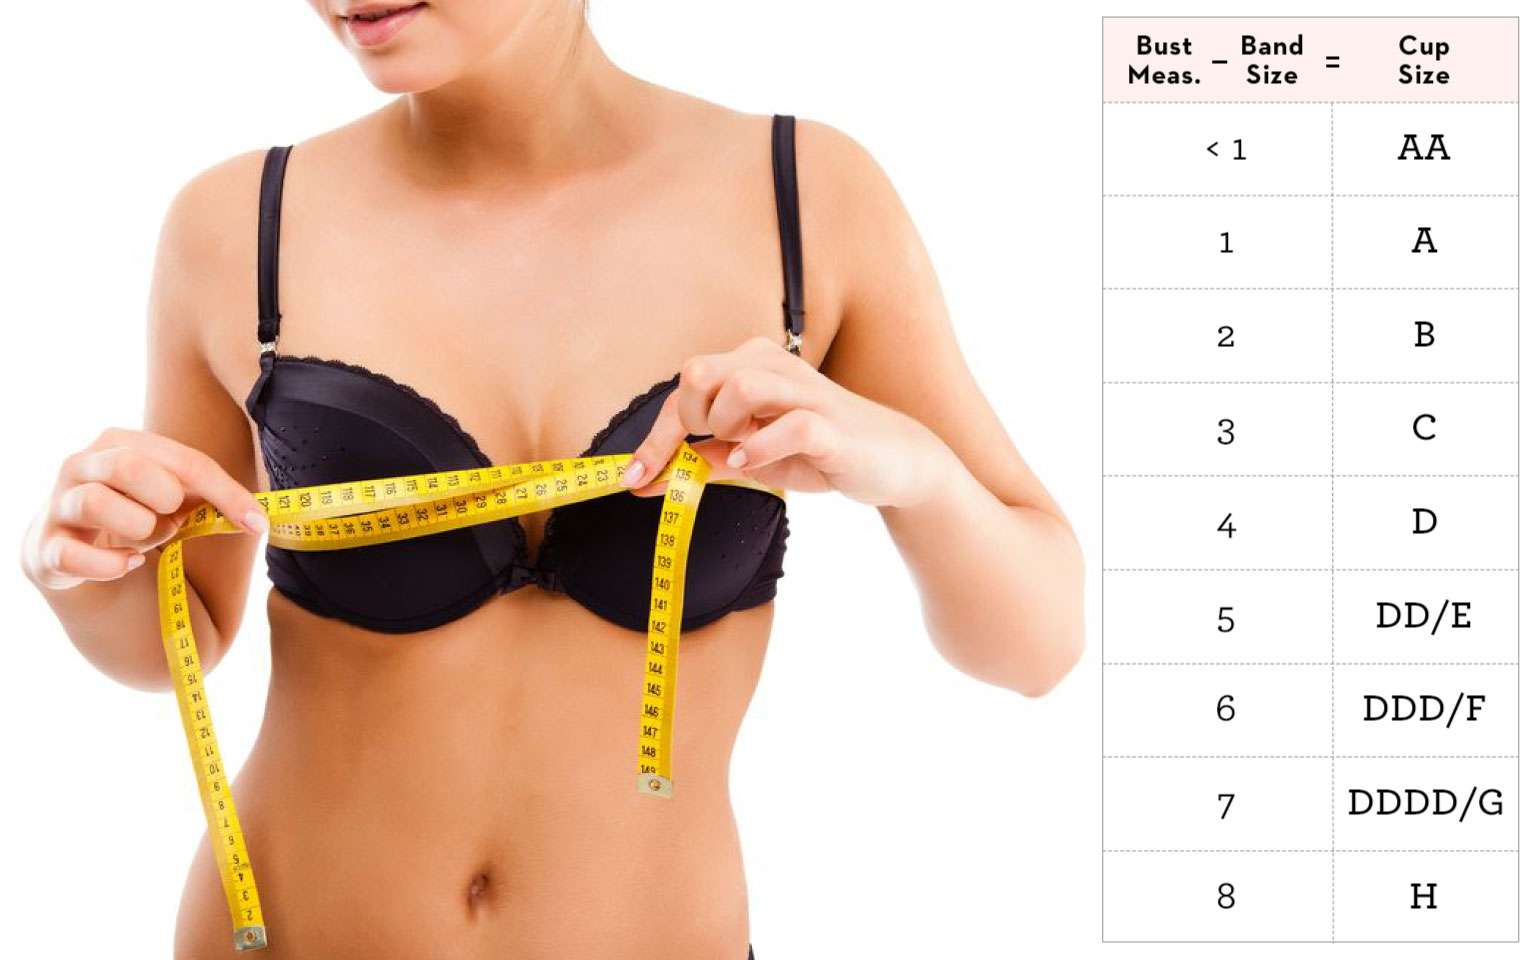 How to Measure Breast Size for Bra